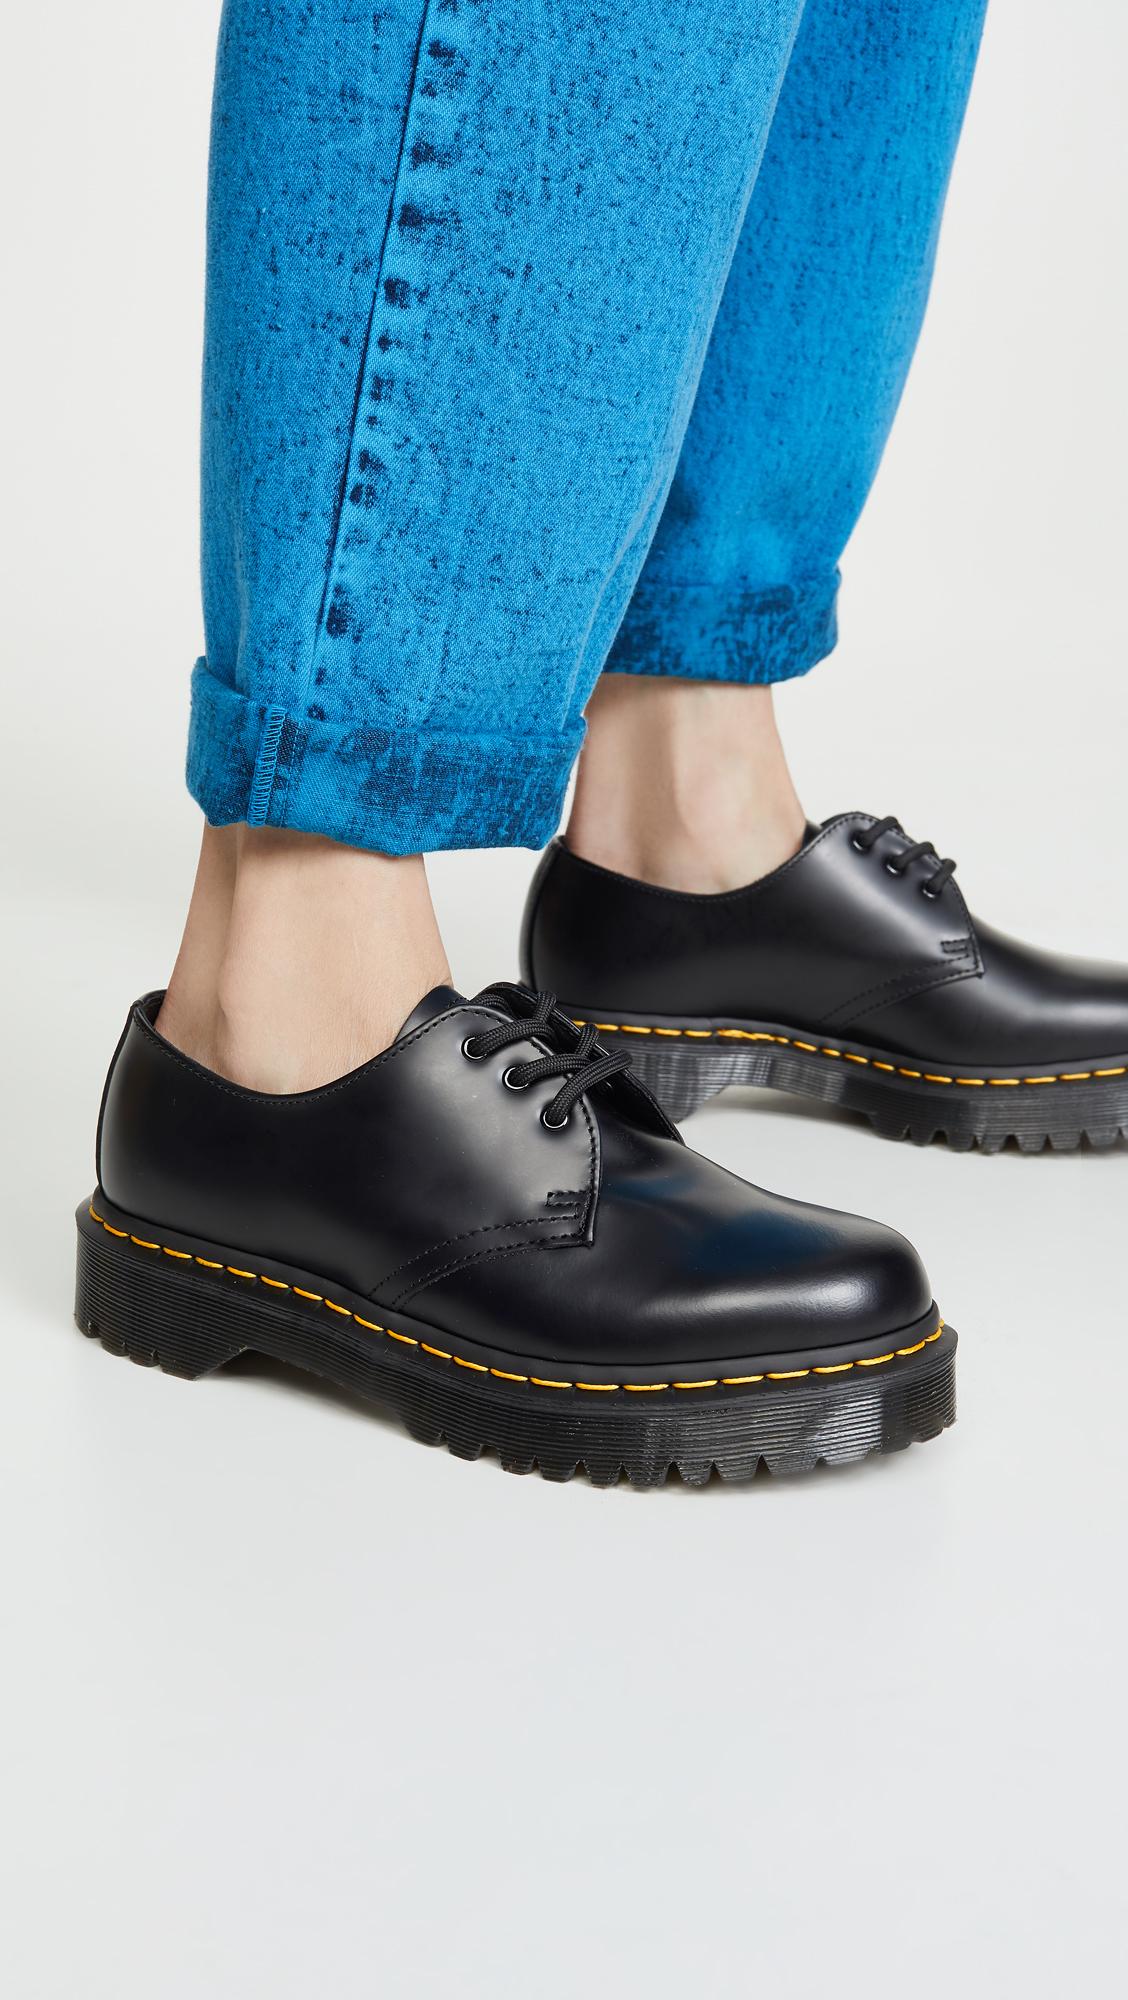 Dr Martens 1461 Bex 3-eyelet Black womens Leather casual Lace-up Shoes